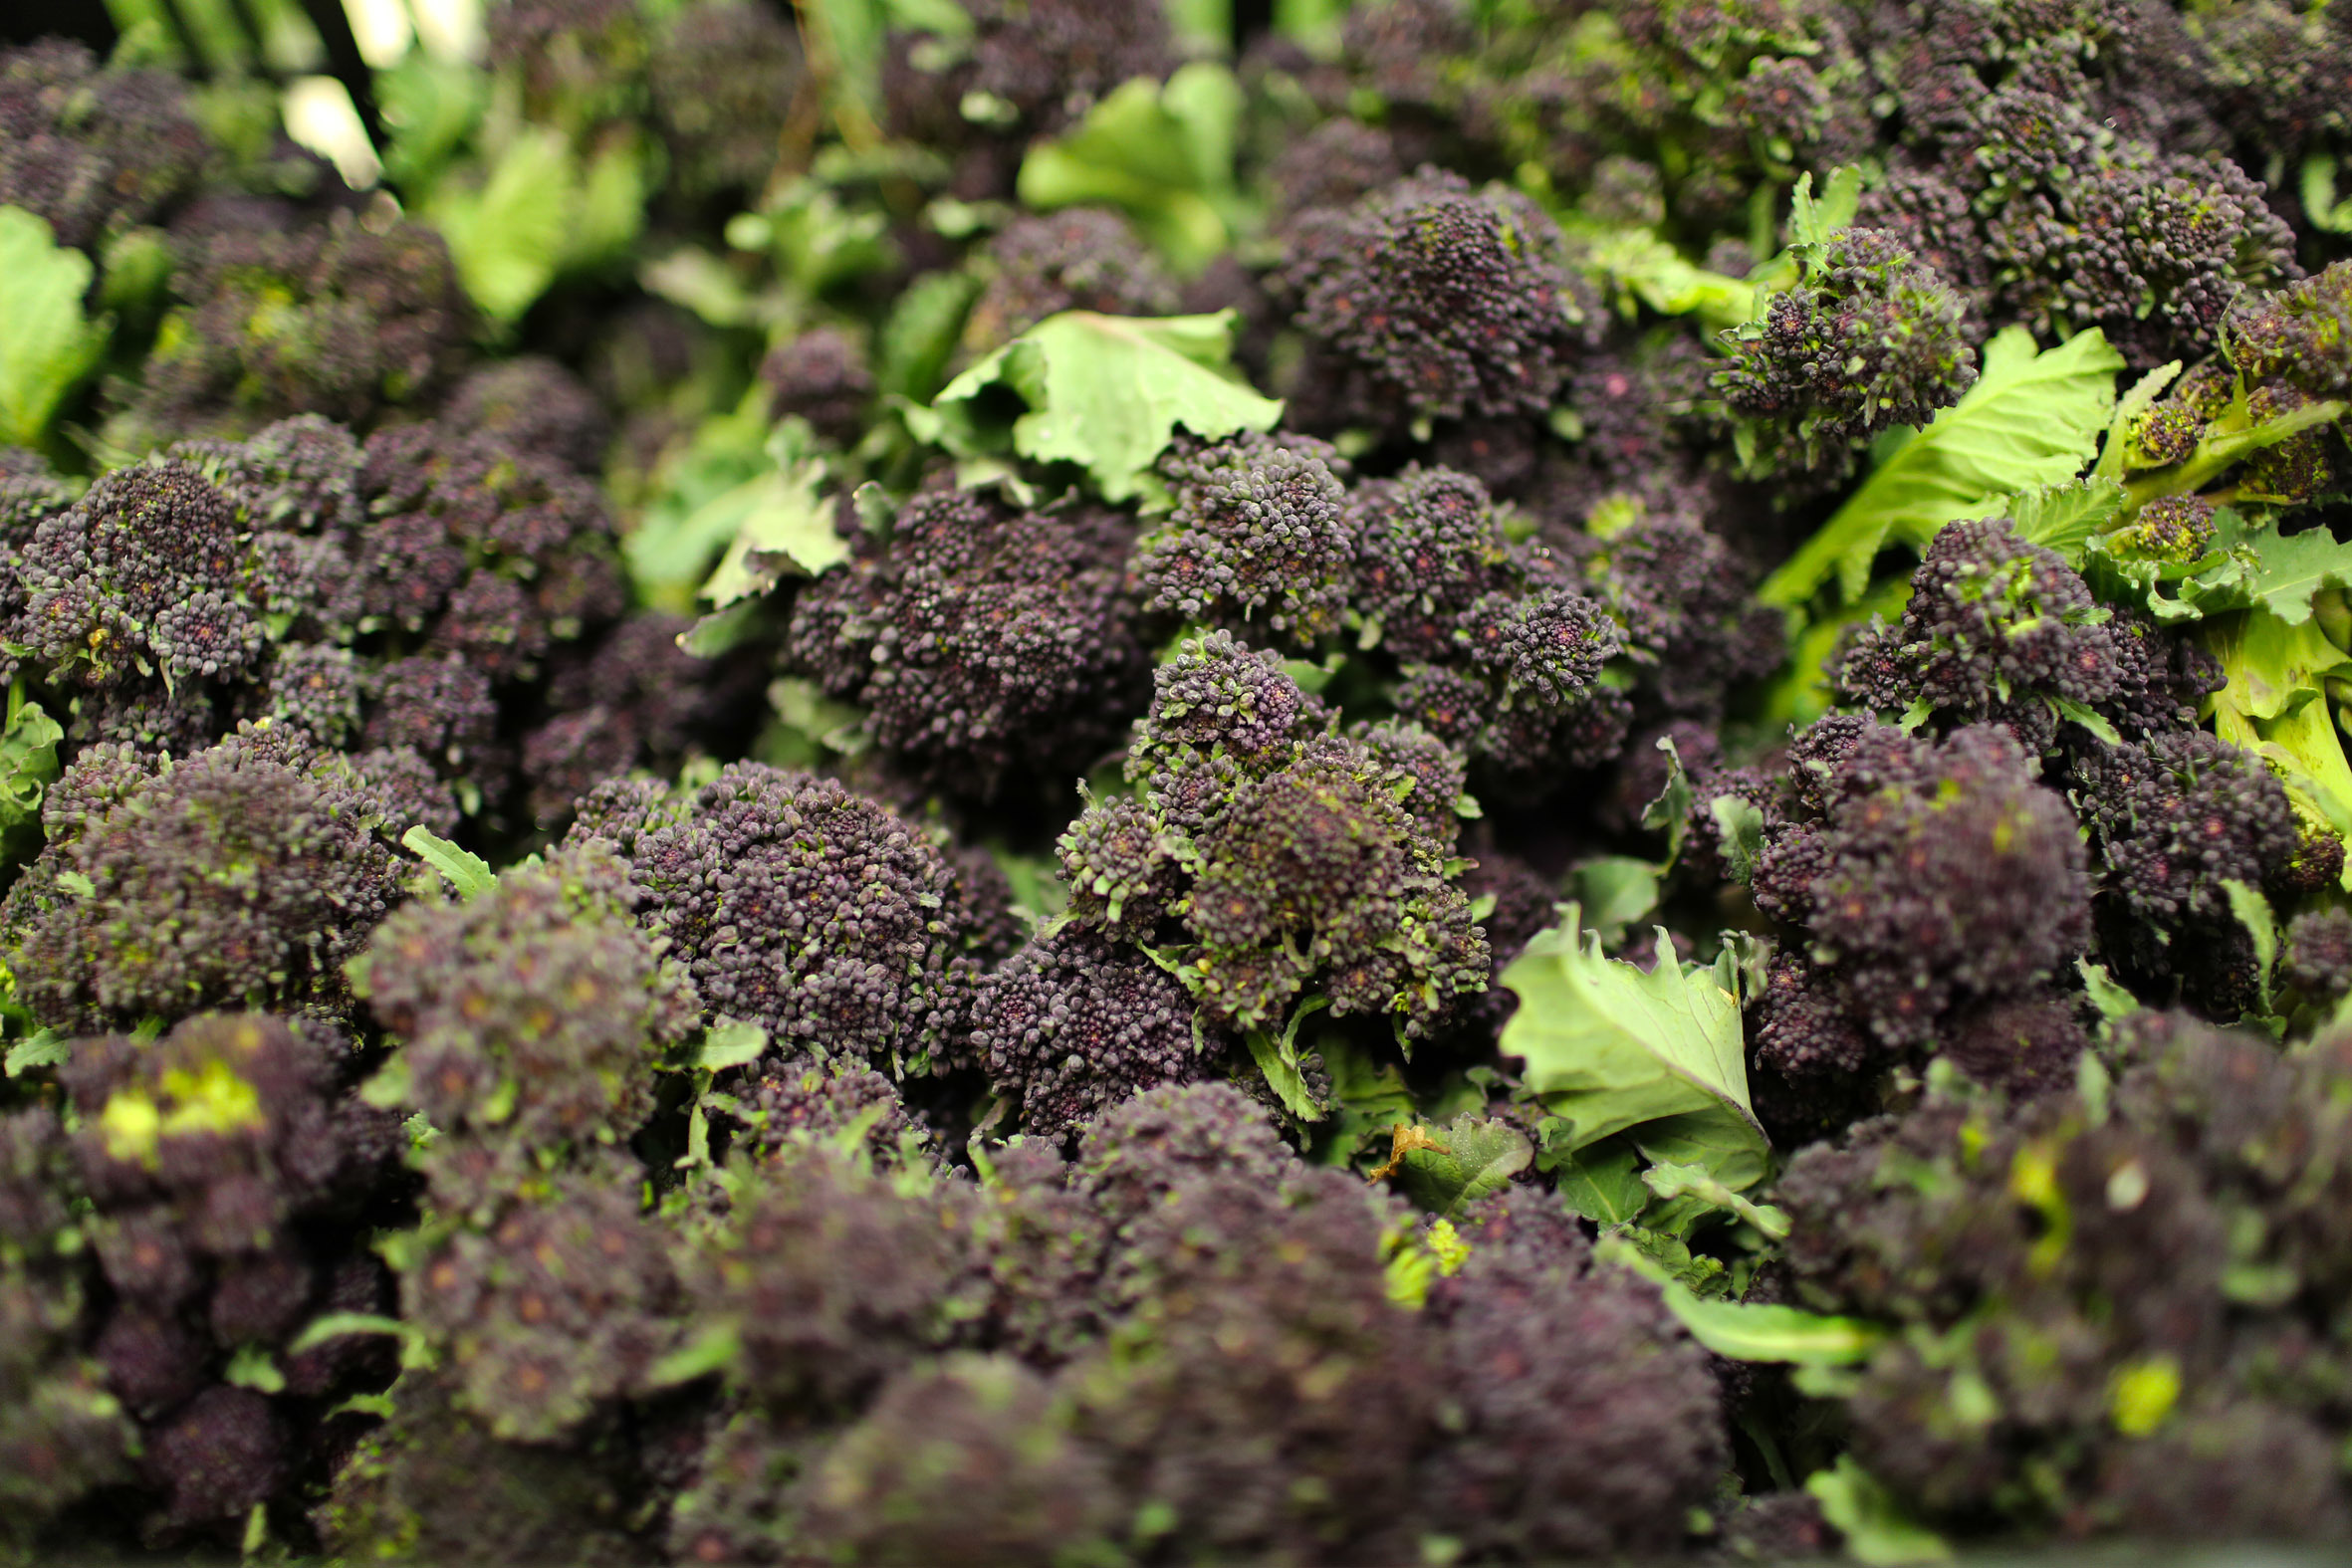 fruit-and-vegetable-market-report-february-2014-purple-sprouting.jpg?mtime=20170922113424#asset:11352